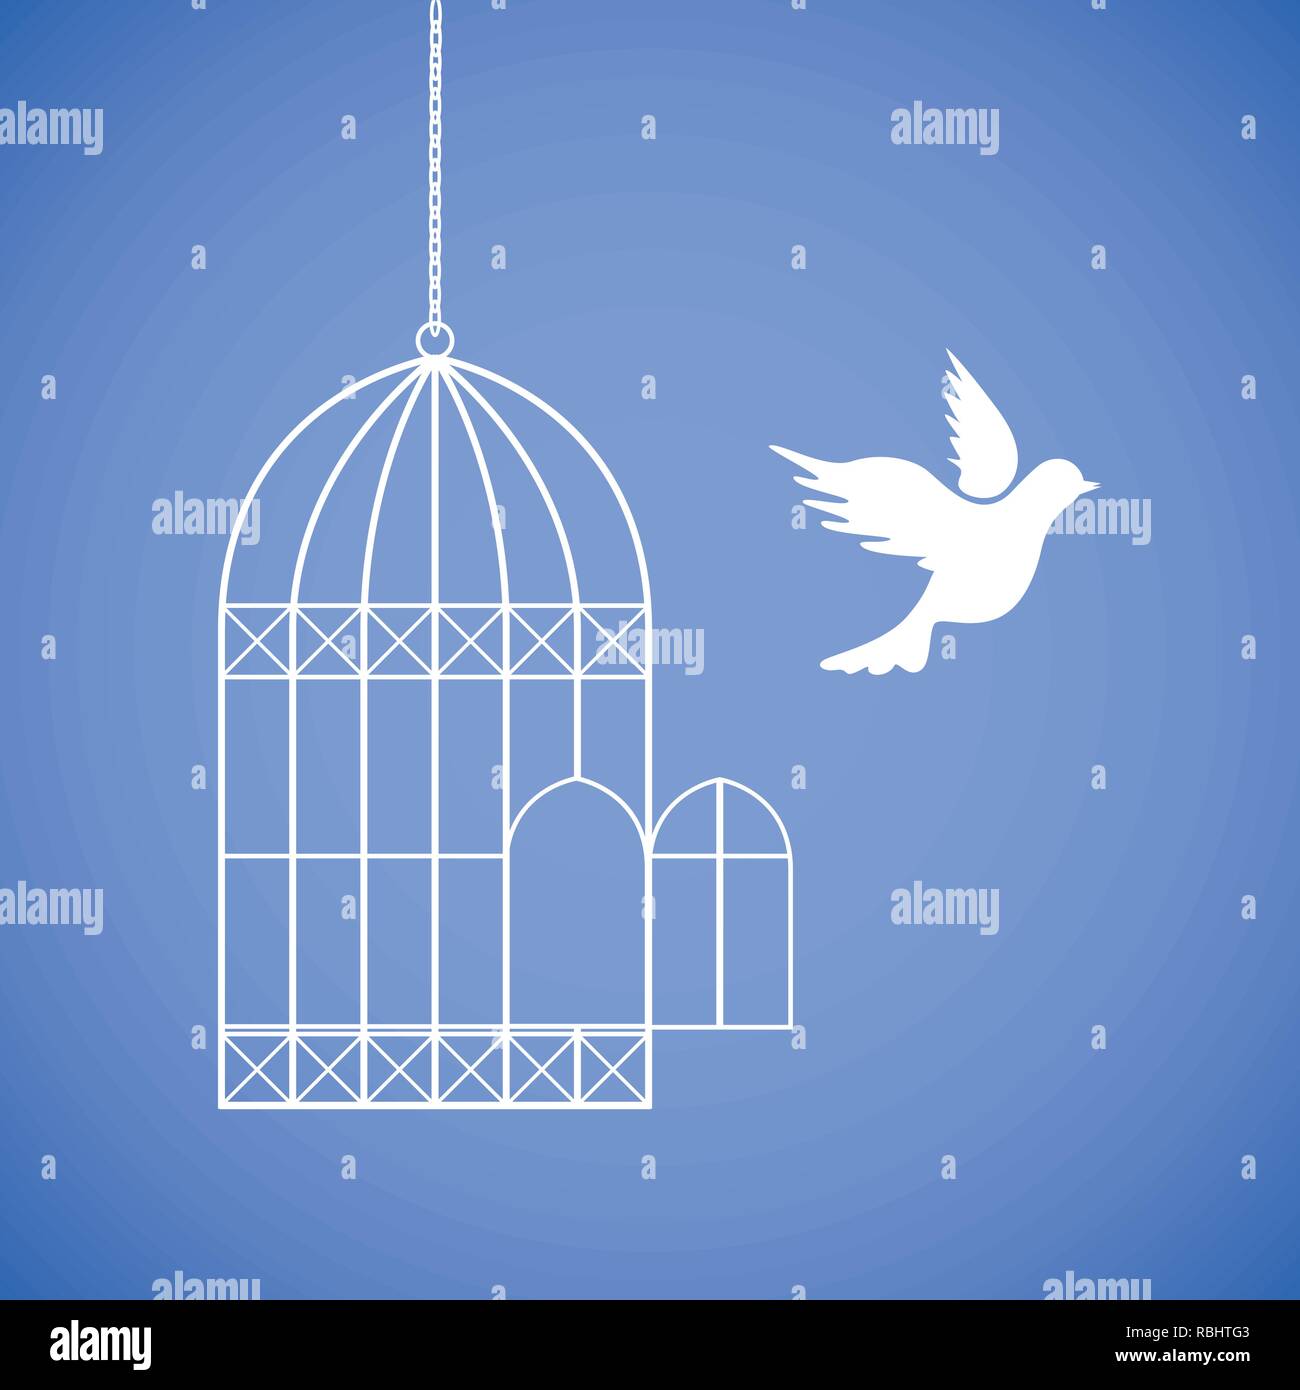 white dove flies out of the cage vector illustration EPS10 Stock Vector